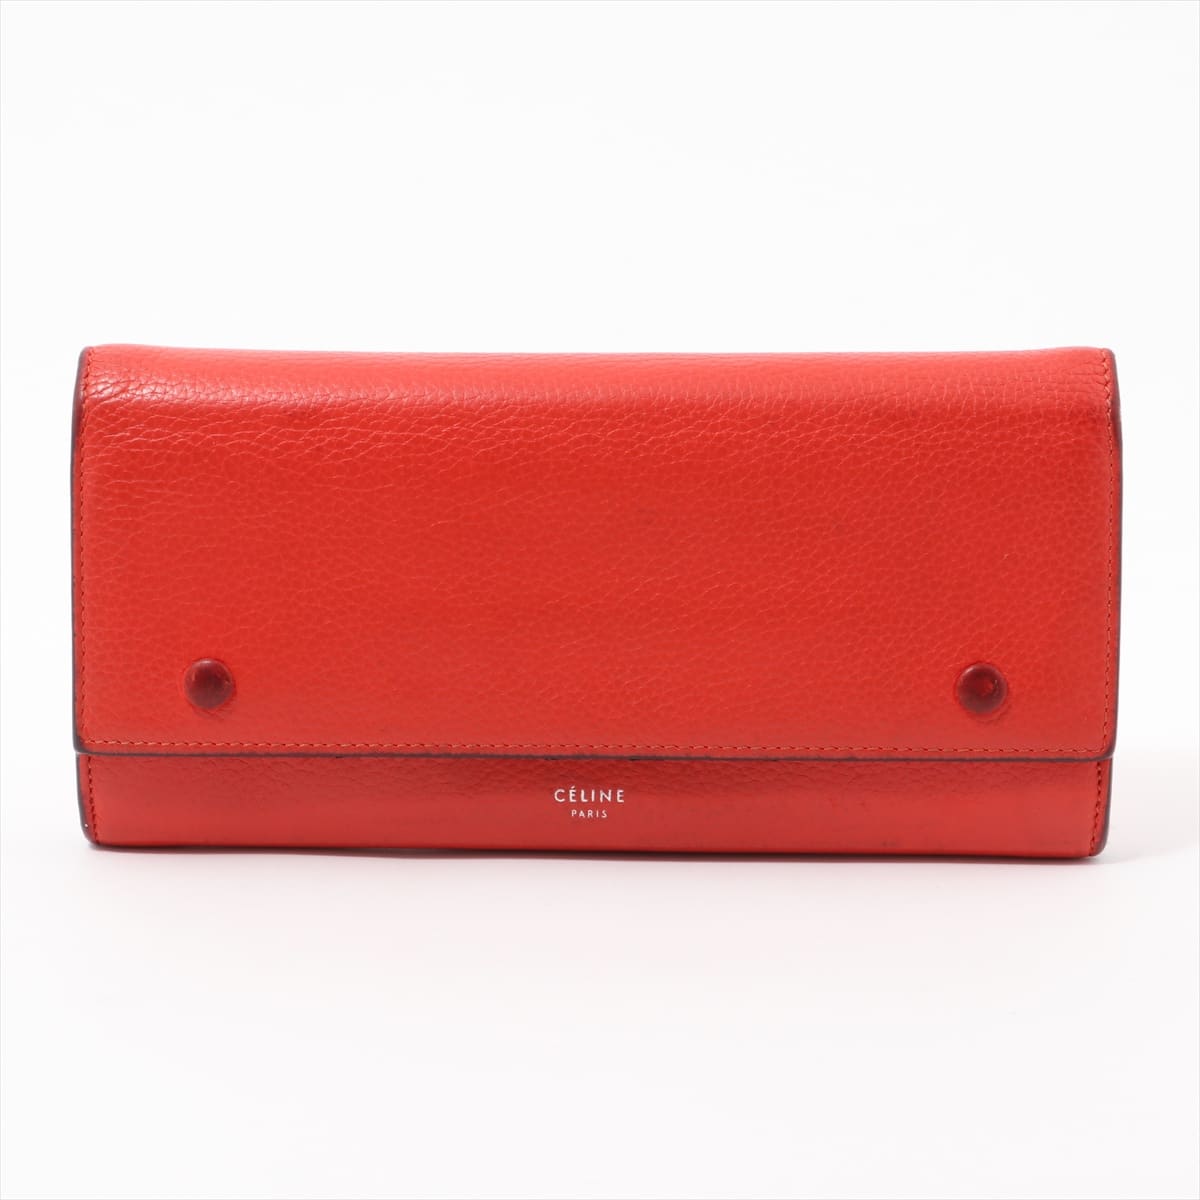 CELINE Large Flap Multi Function Leather Wallet Red